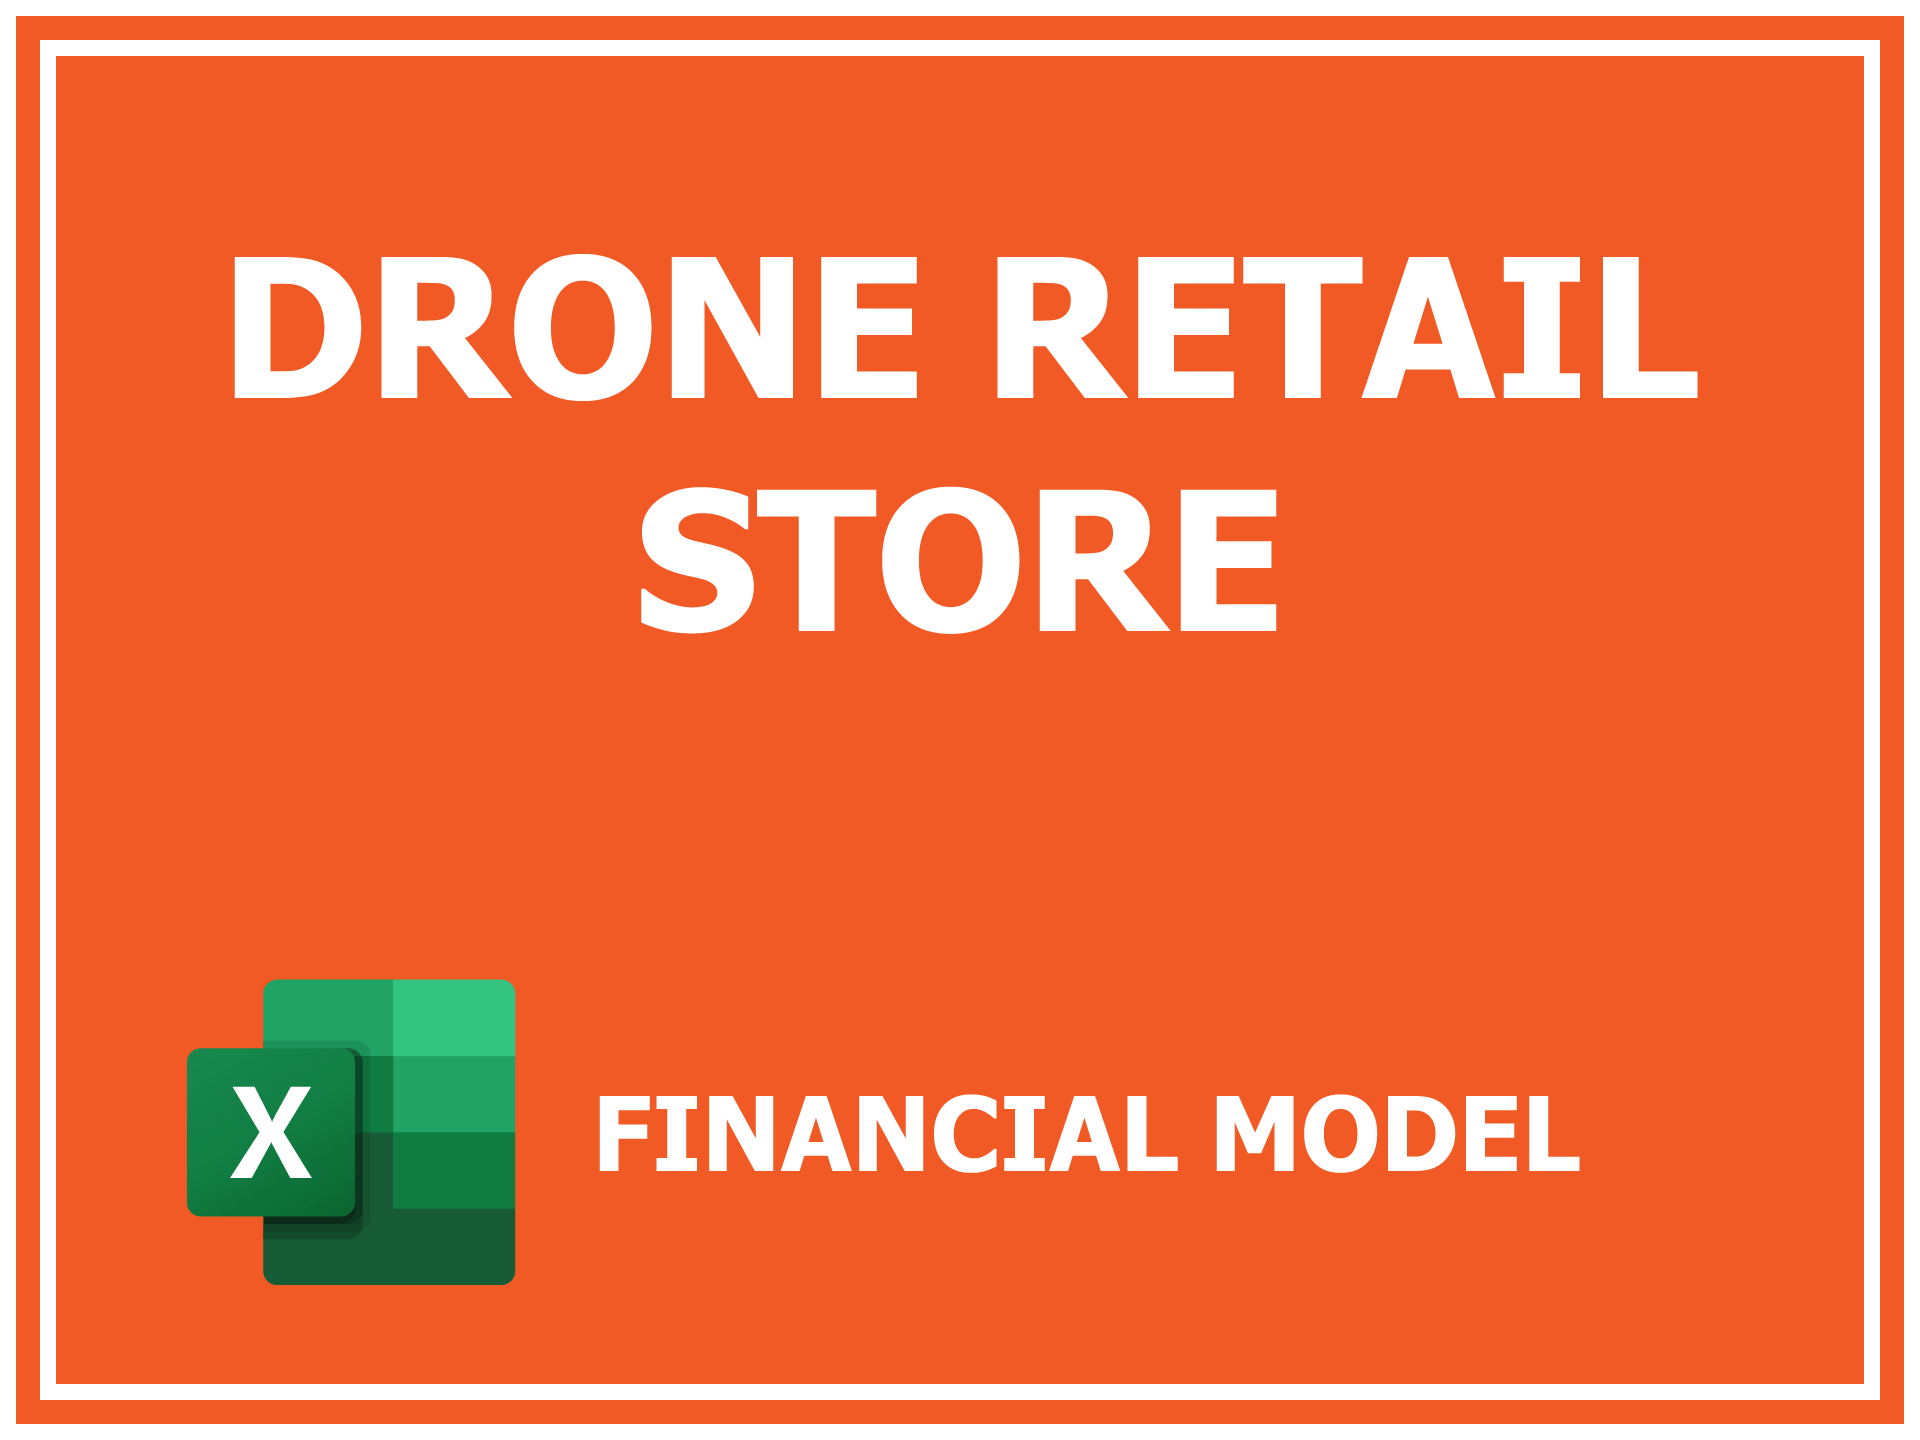 Drone Retail Store